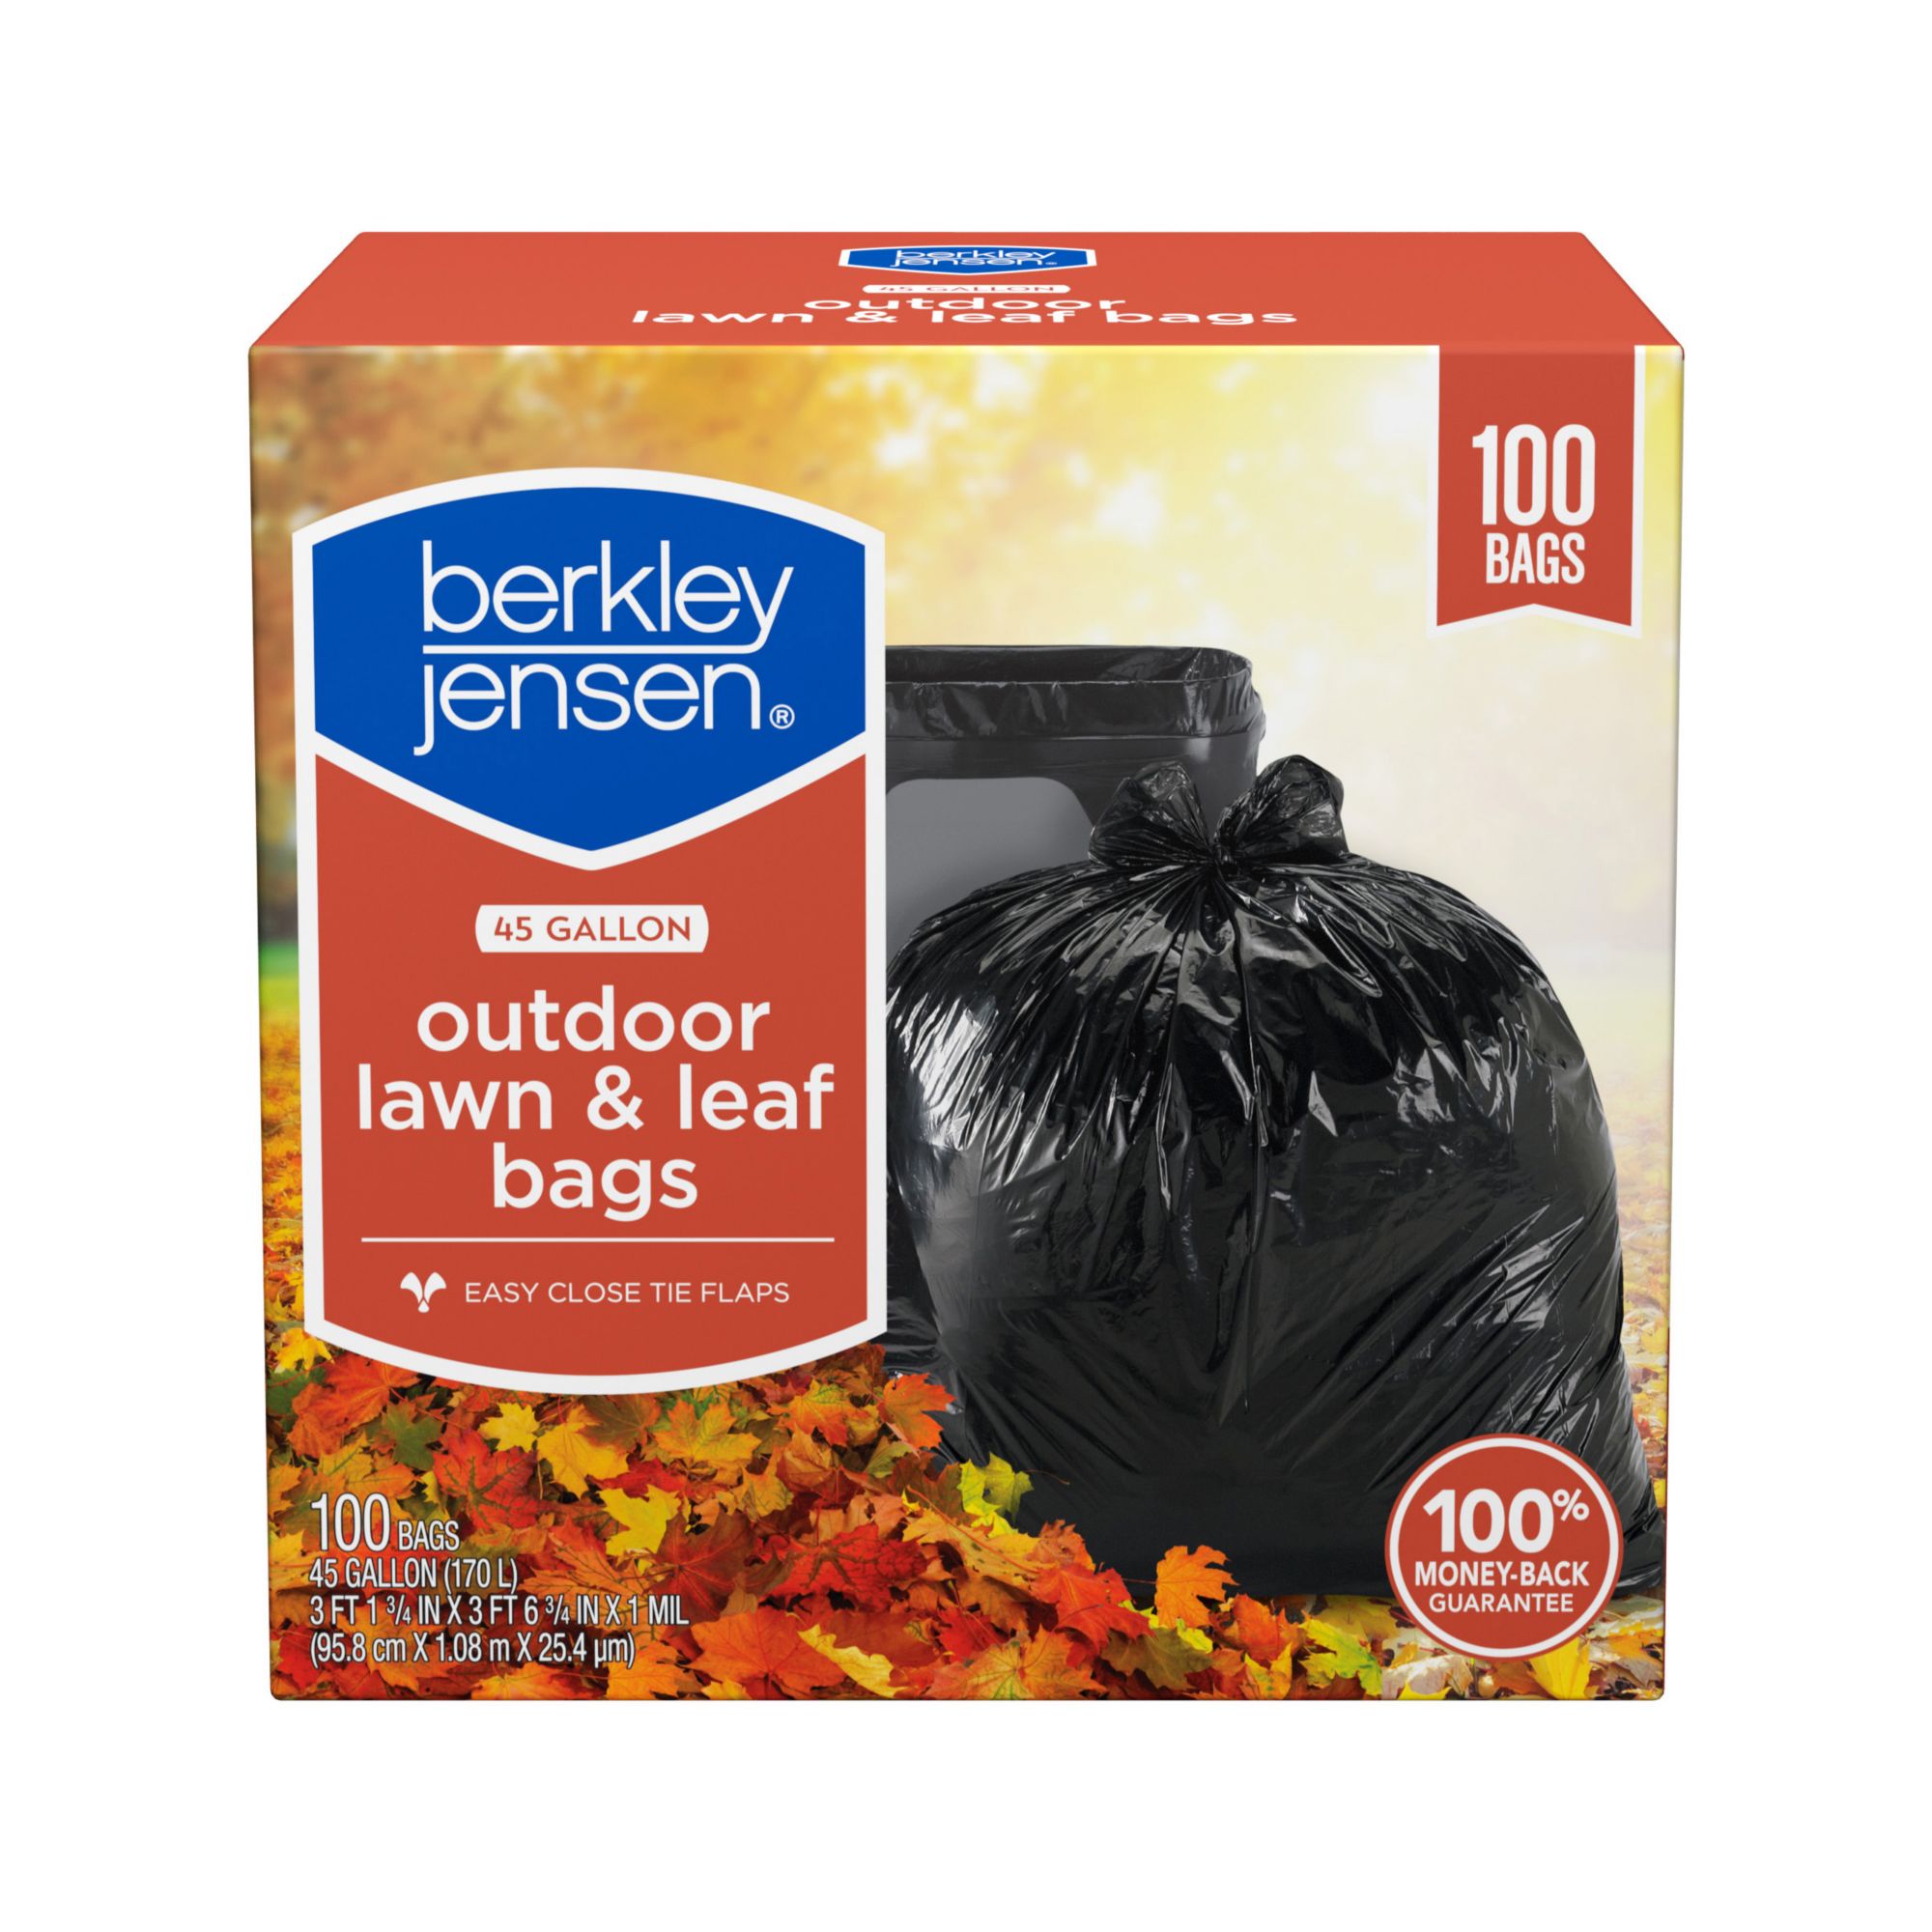 Simpleliners 55 Gallon Trash Bags Heavy Duty, (50 Count w/Ties